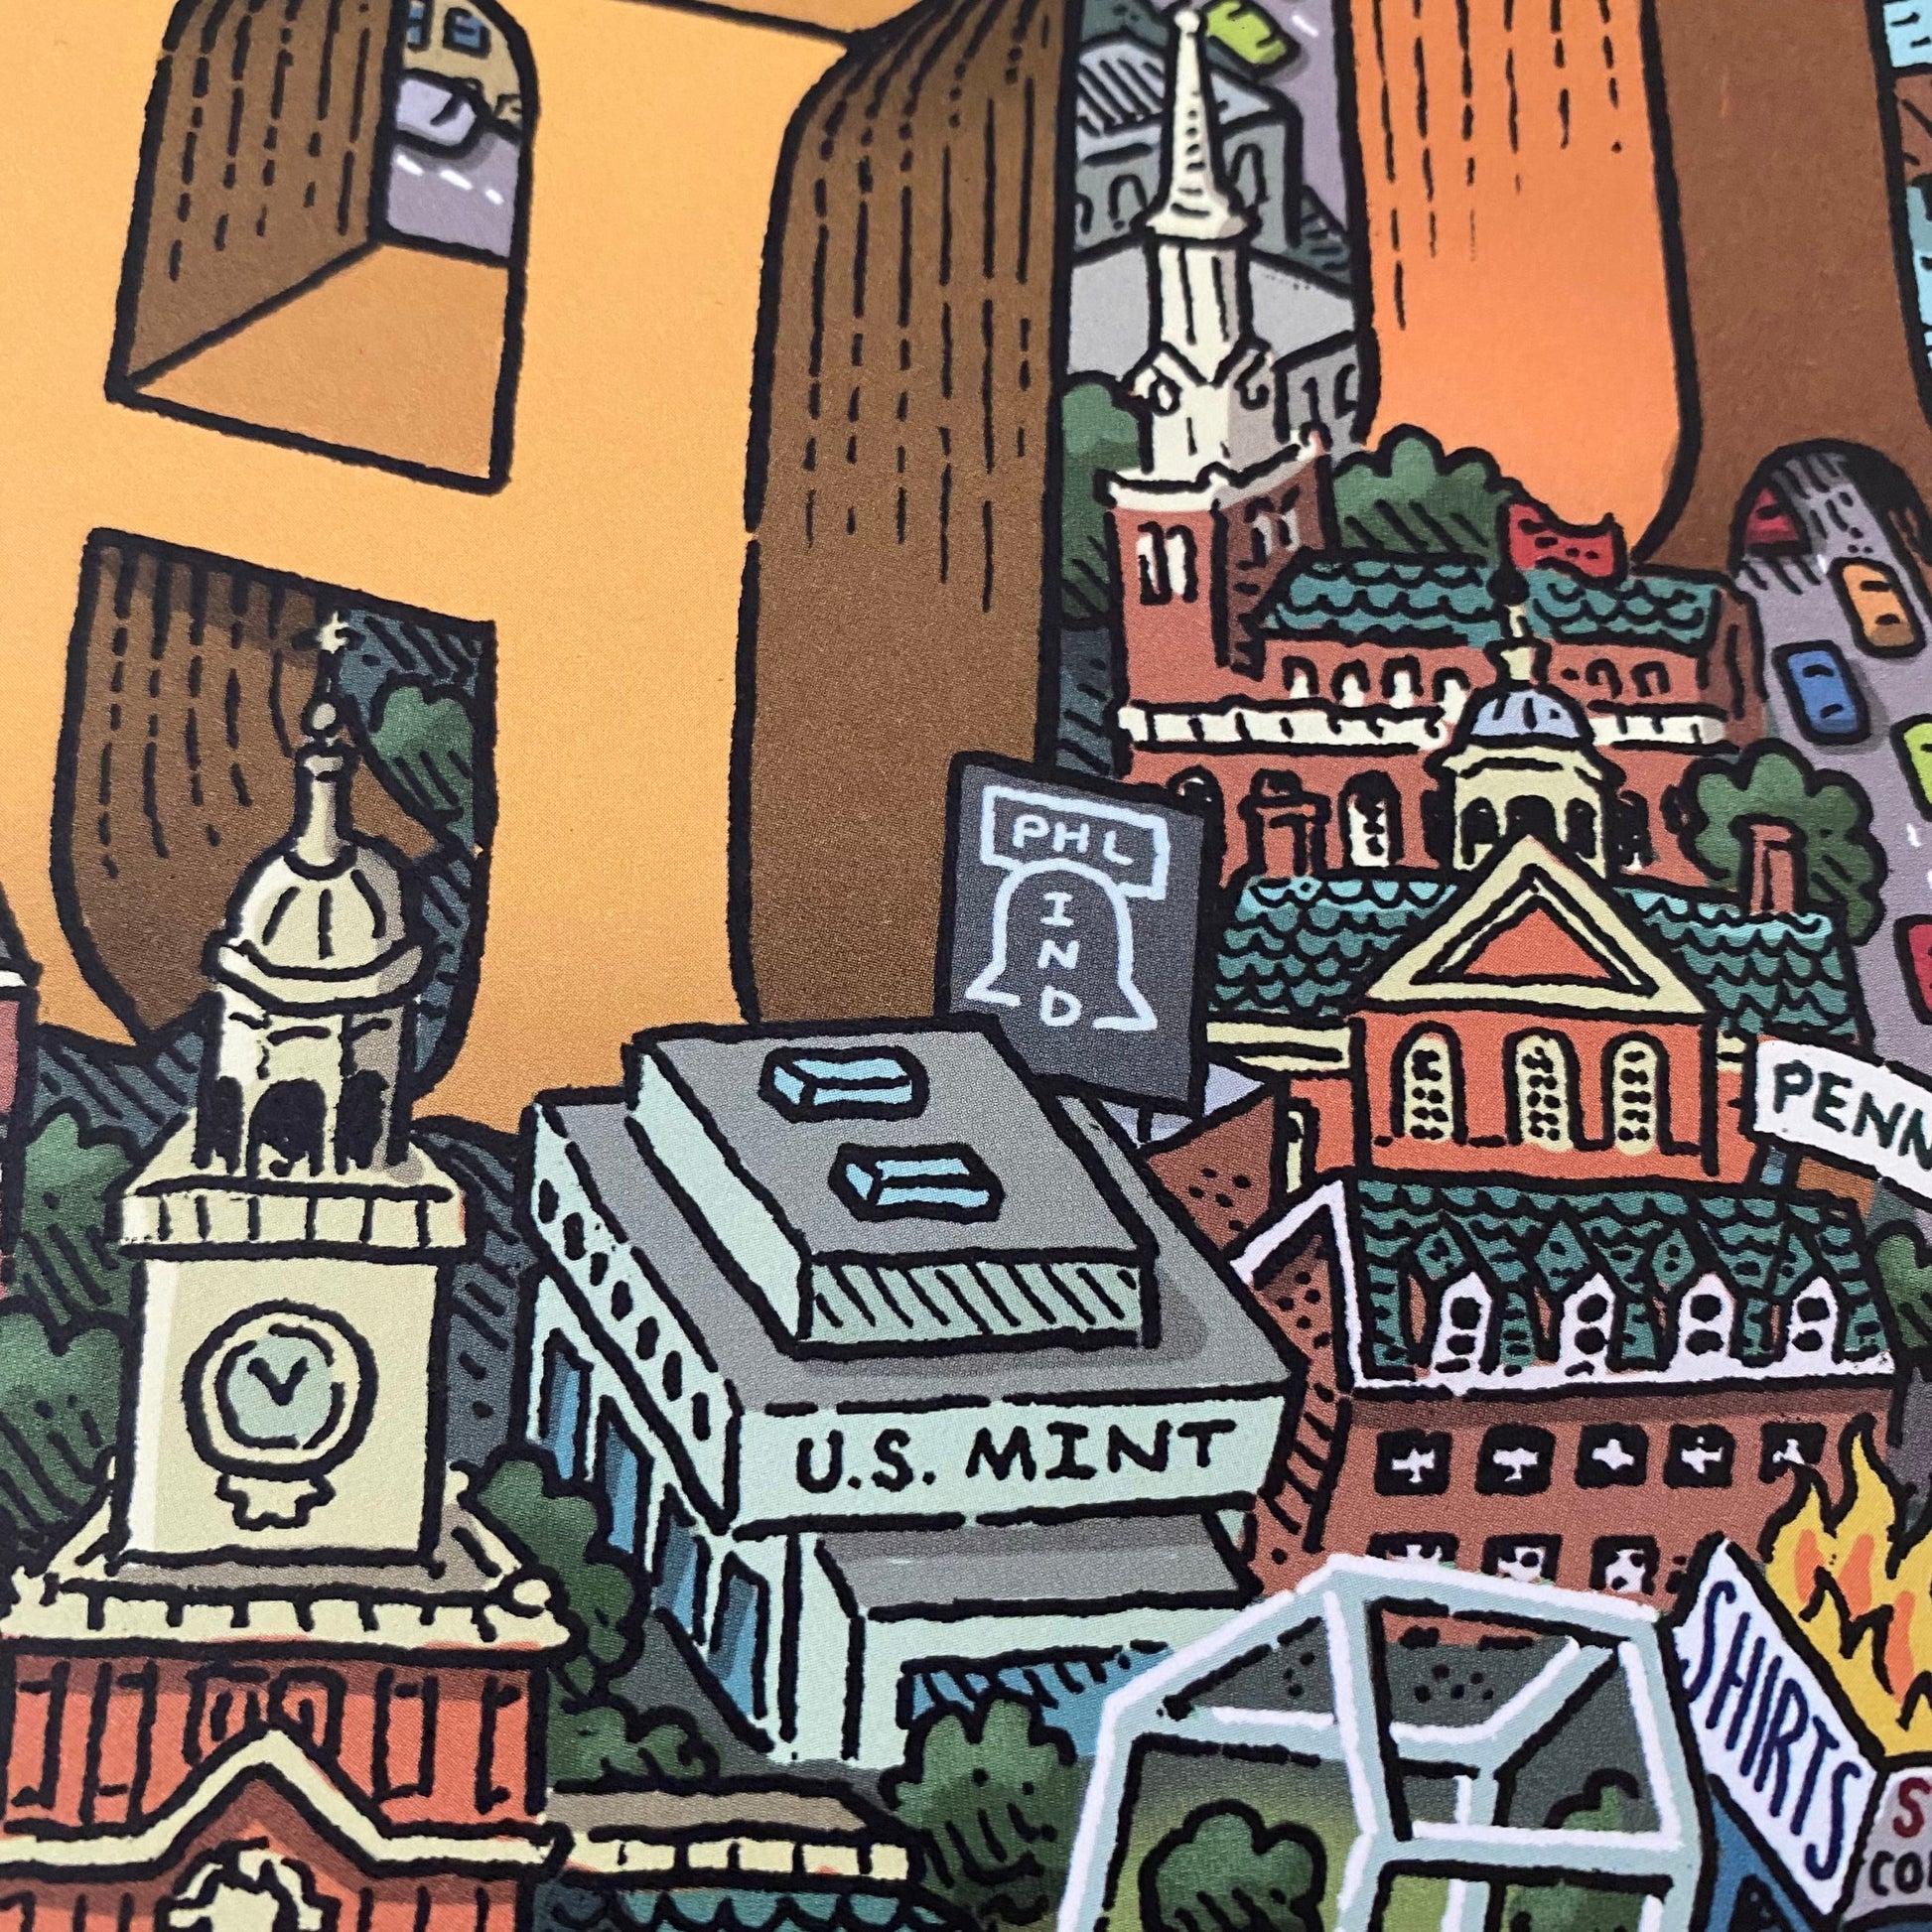 Illustration of a colorful cityscape featuring the U.S. Mint and other buildings, with a sign pointing towards the Philadelphia Landmarks Map, crafted by Mario Zucca.